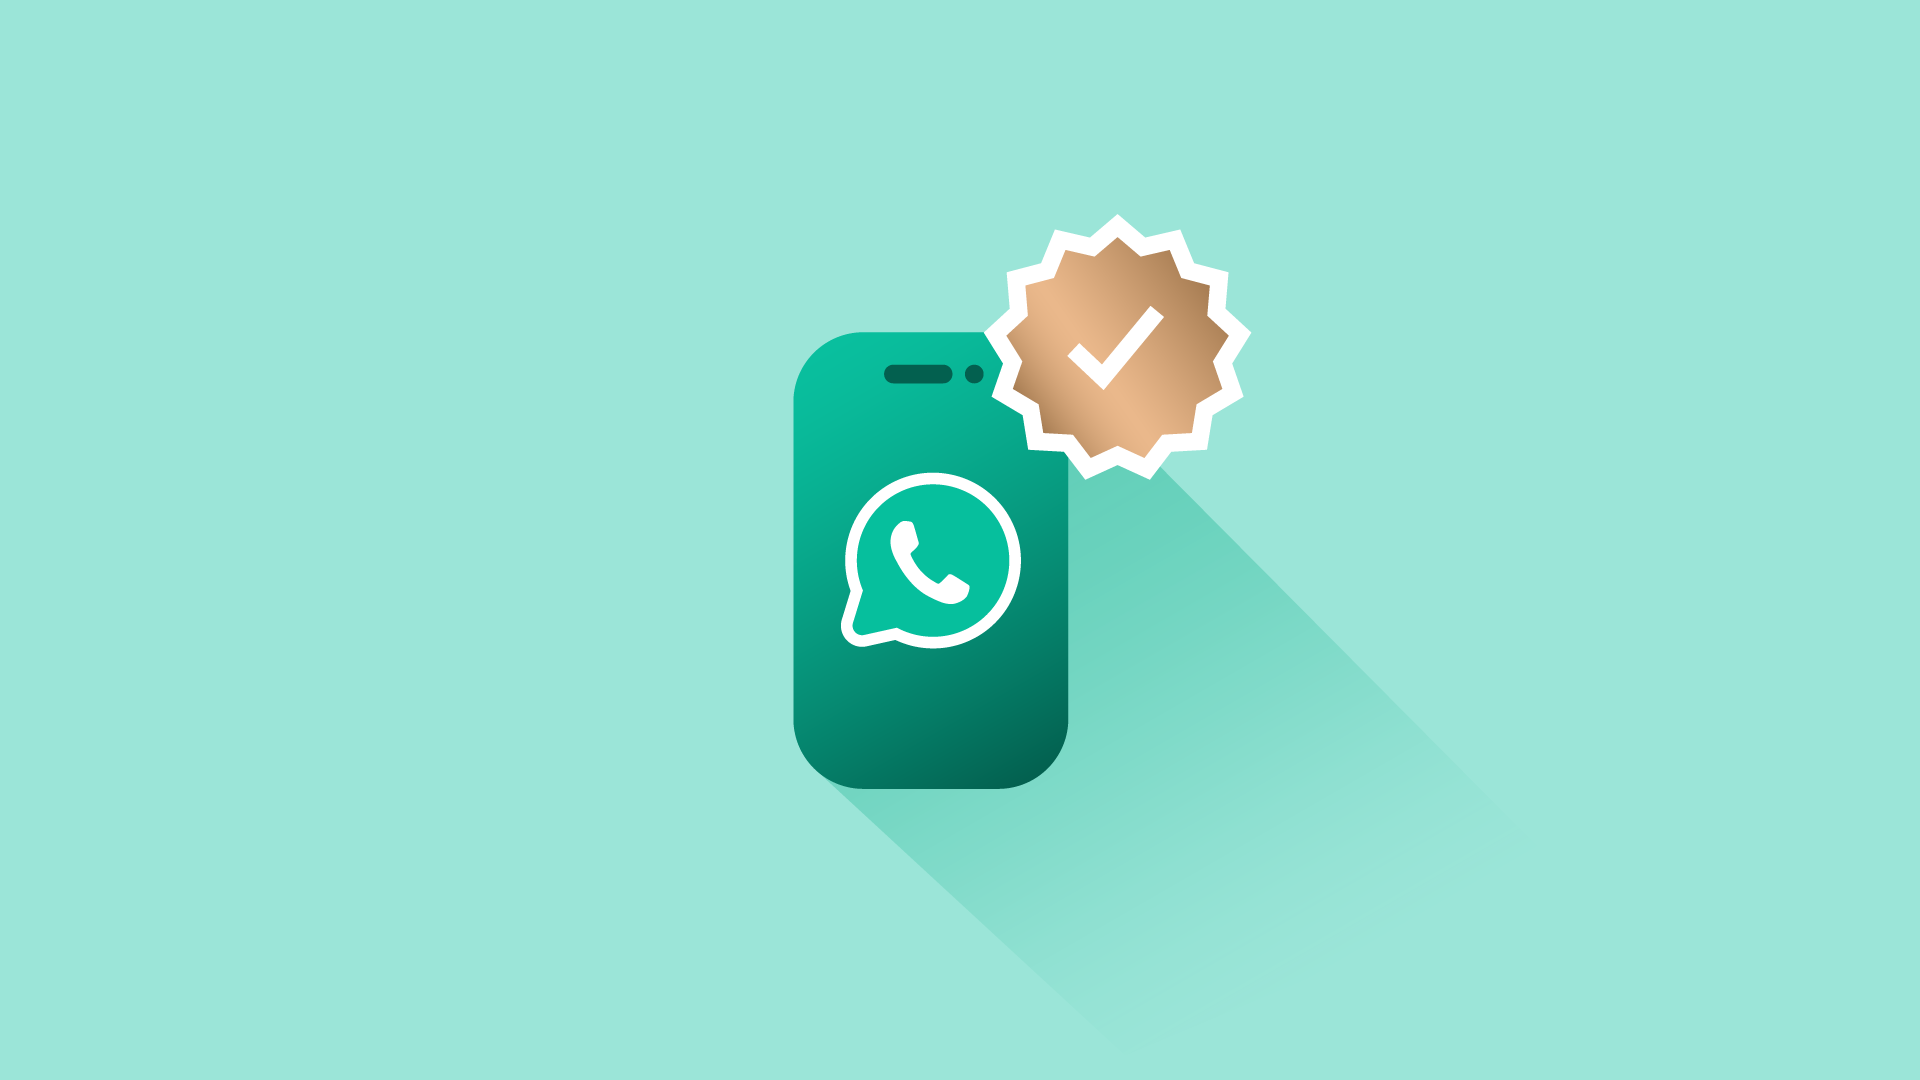 Whatsapp is working on businesses to display verification badge on channels get green tick